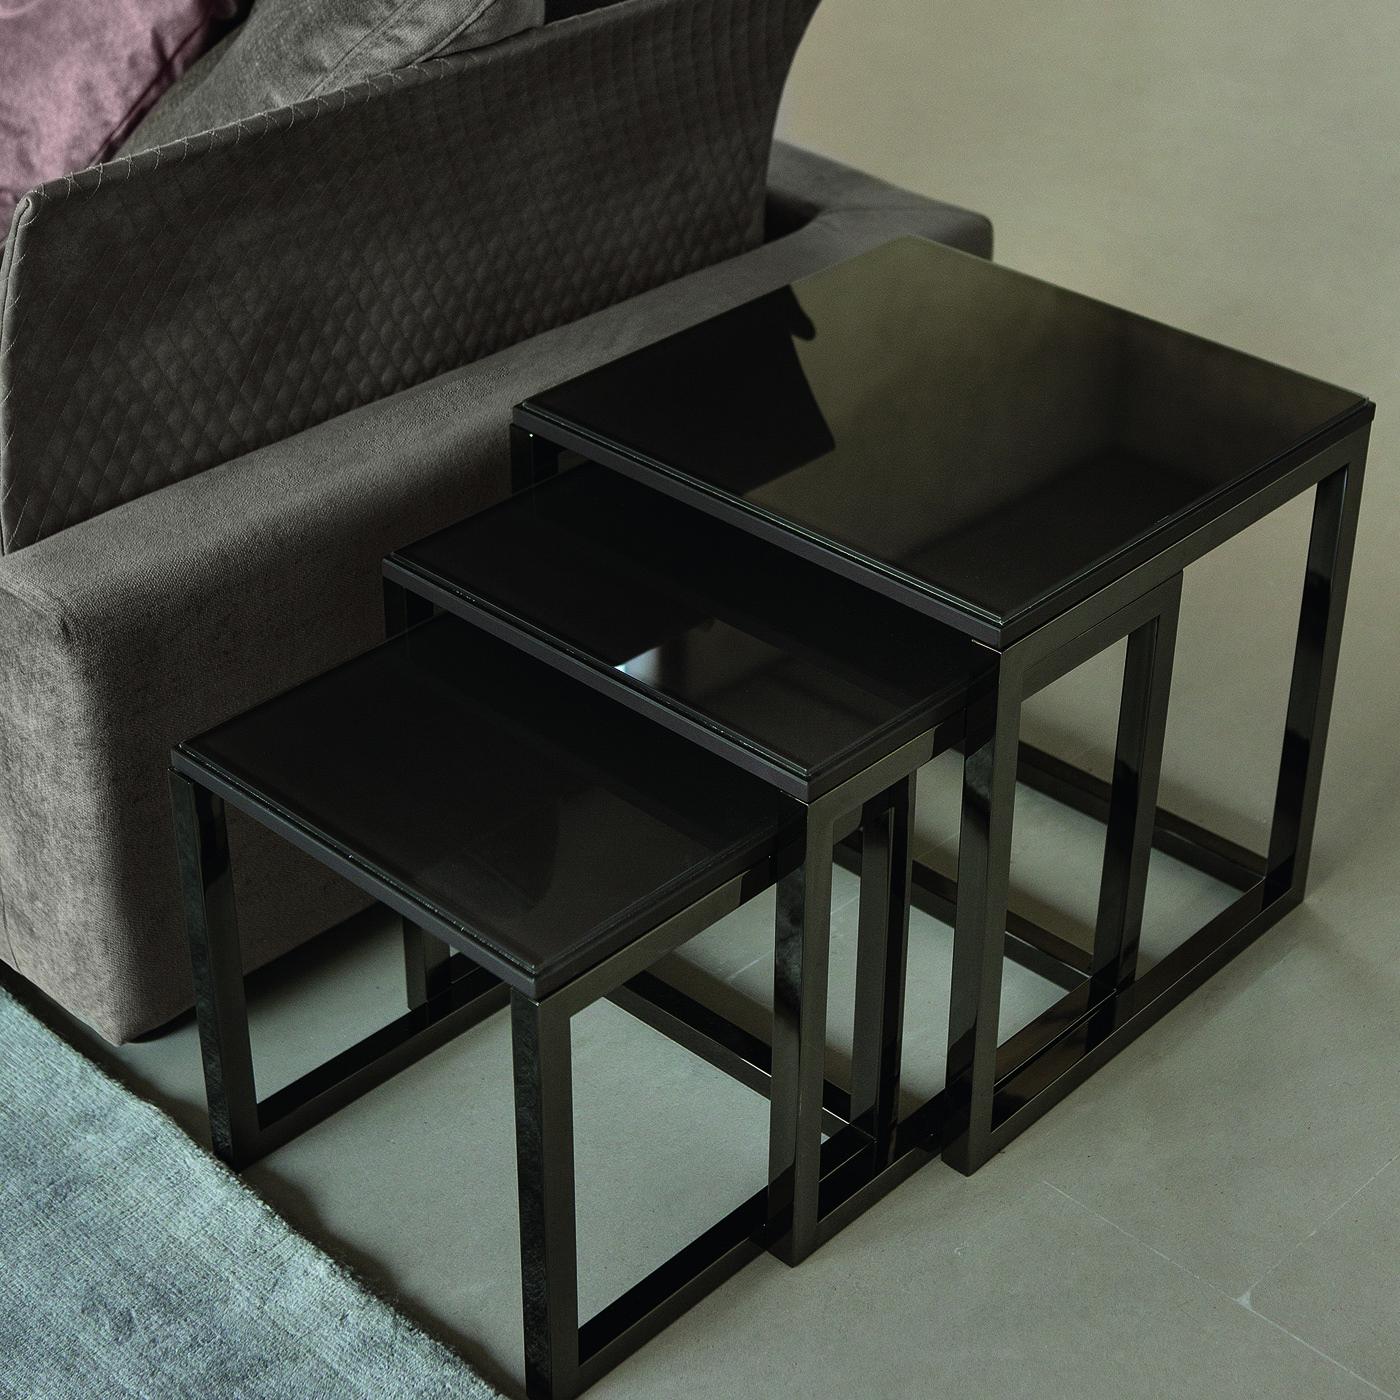 The set of 3 Mondrian tables are classically designed with a sturdy yet sophisticated structure finished in burnished brass or titanium with the top crafted from marble in rich dark tones. An elegant addition to compliment any setting.



